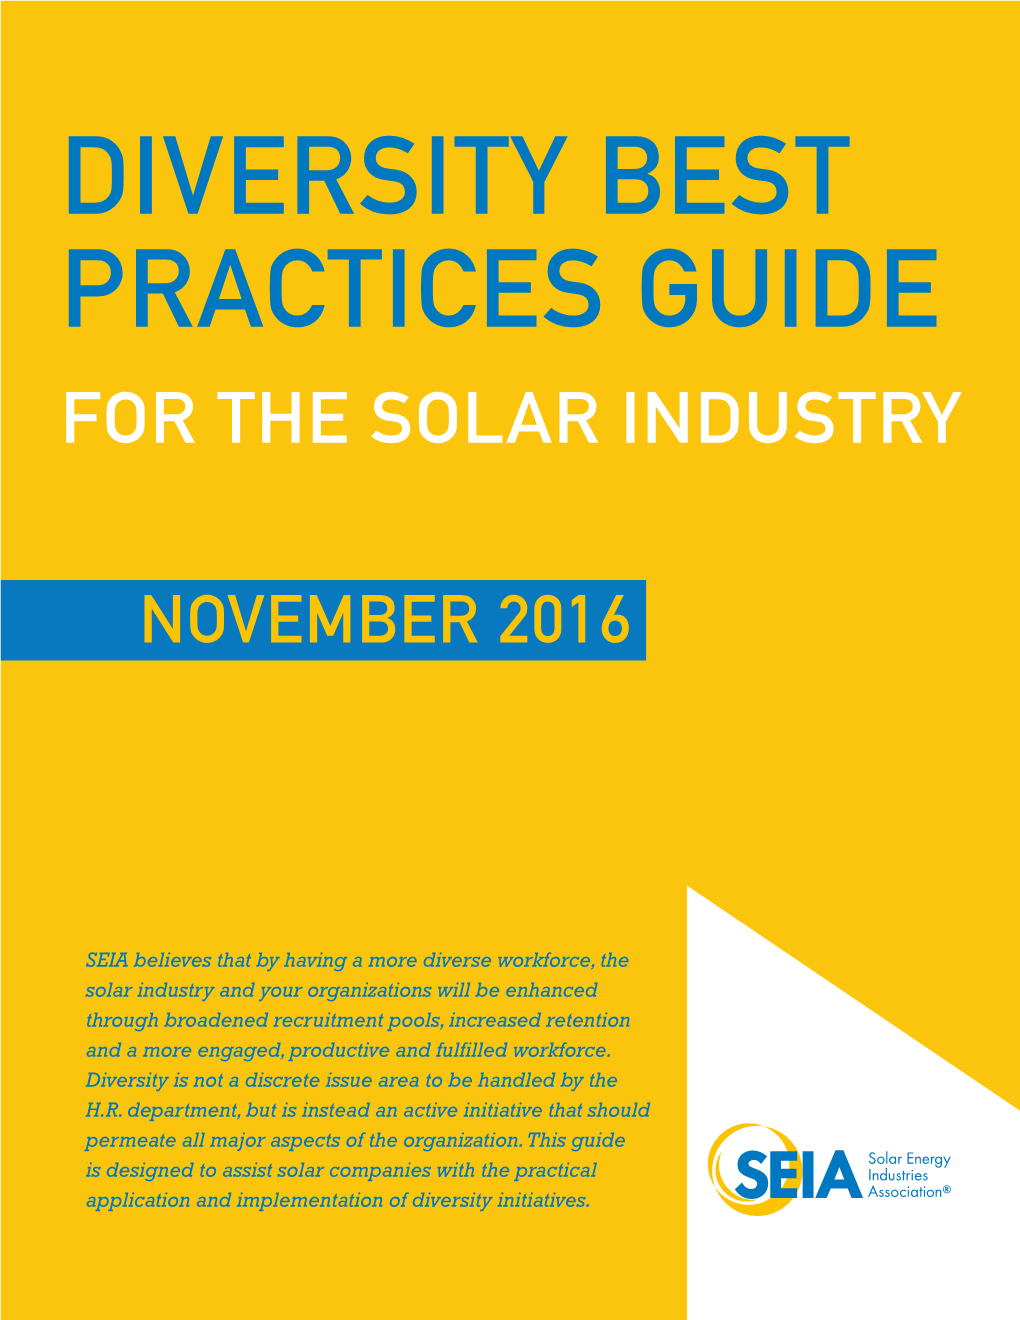 Diversity Best Practices Guide for the Solar Industry